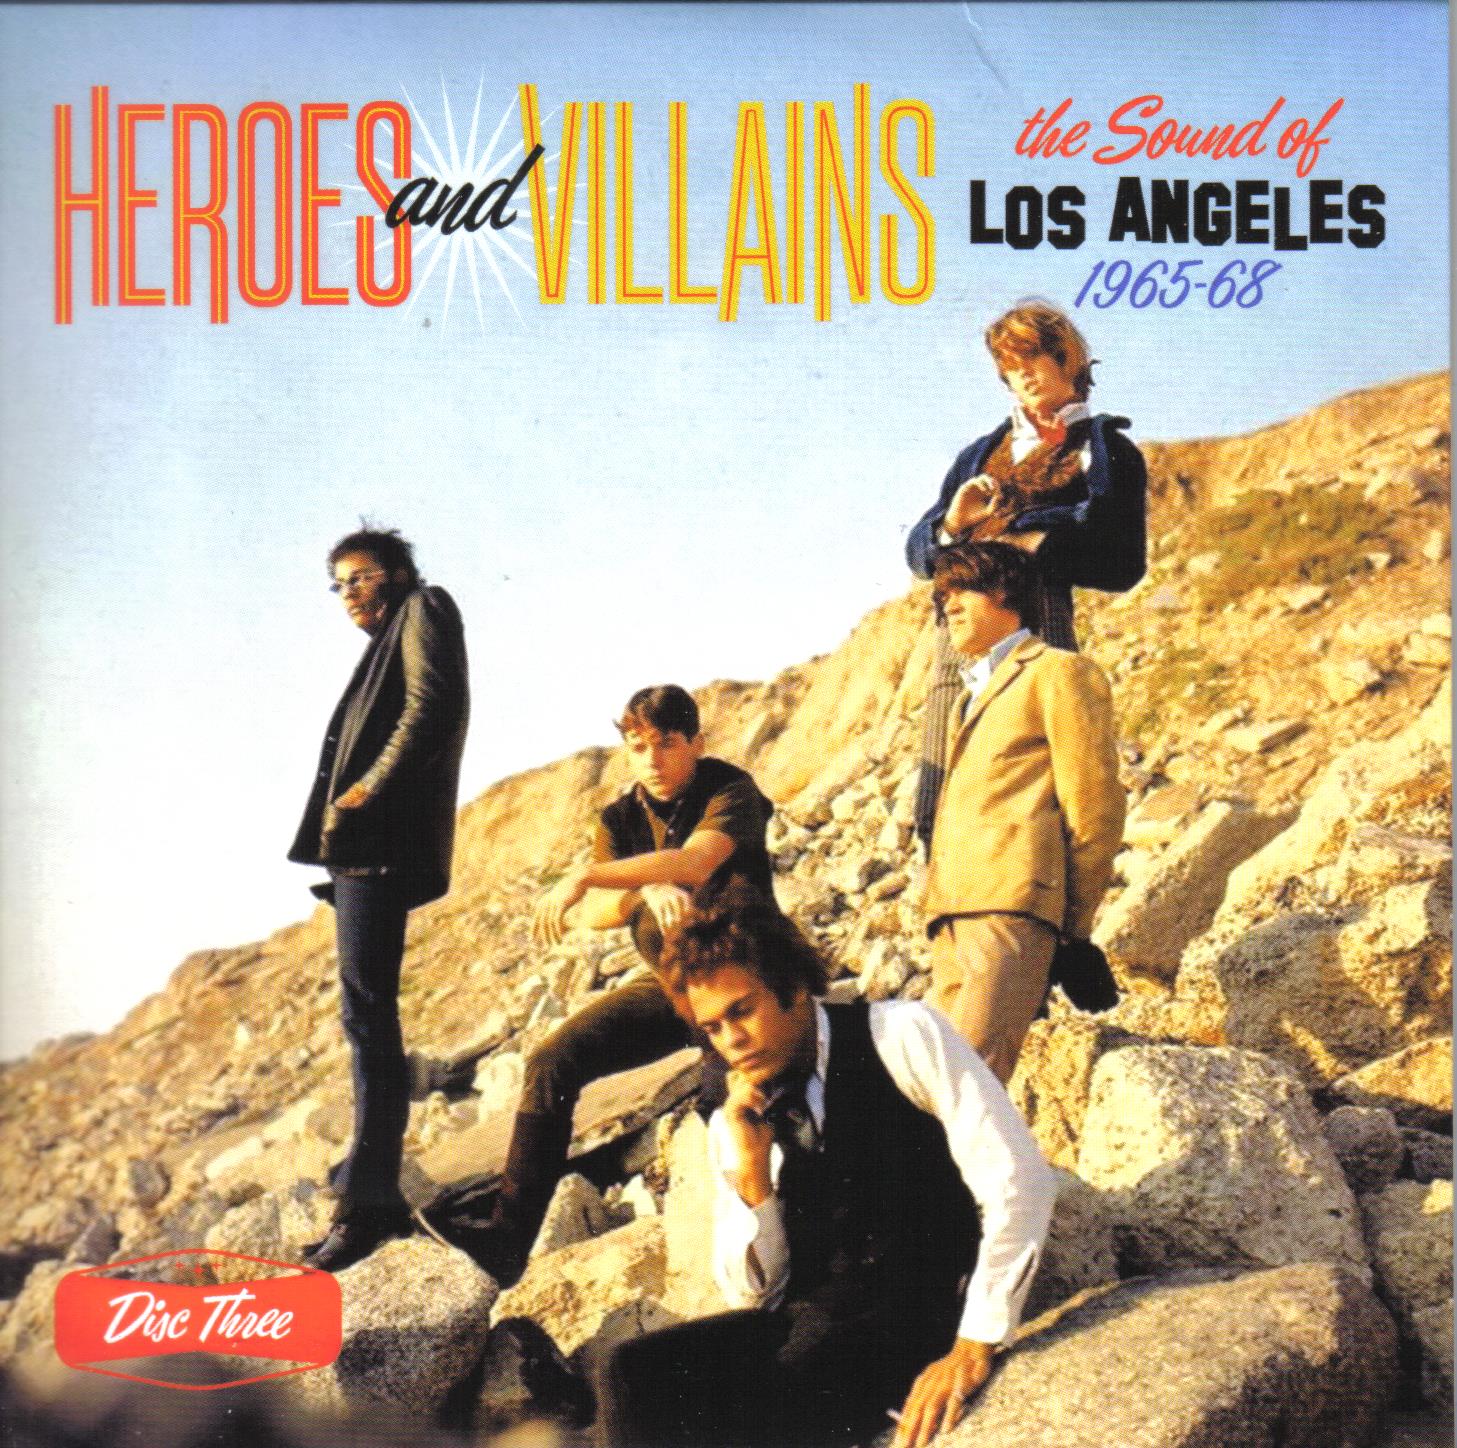 VA - Heroes And Villains The Sound Of Los Angeles 1965-68 (2022 Grapefruit)